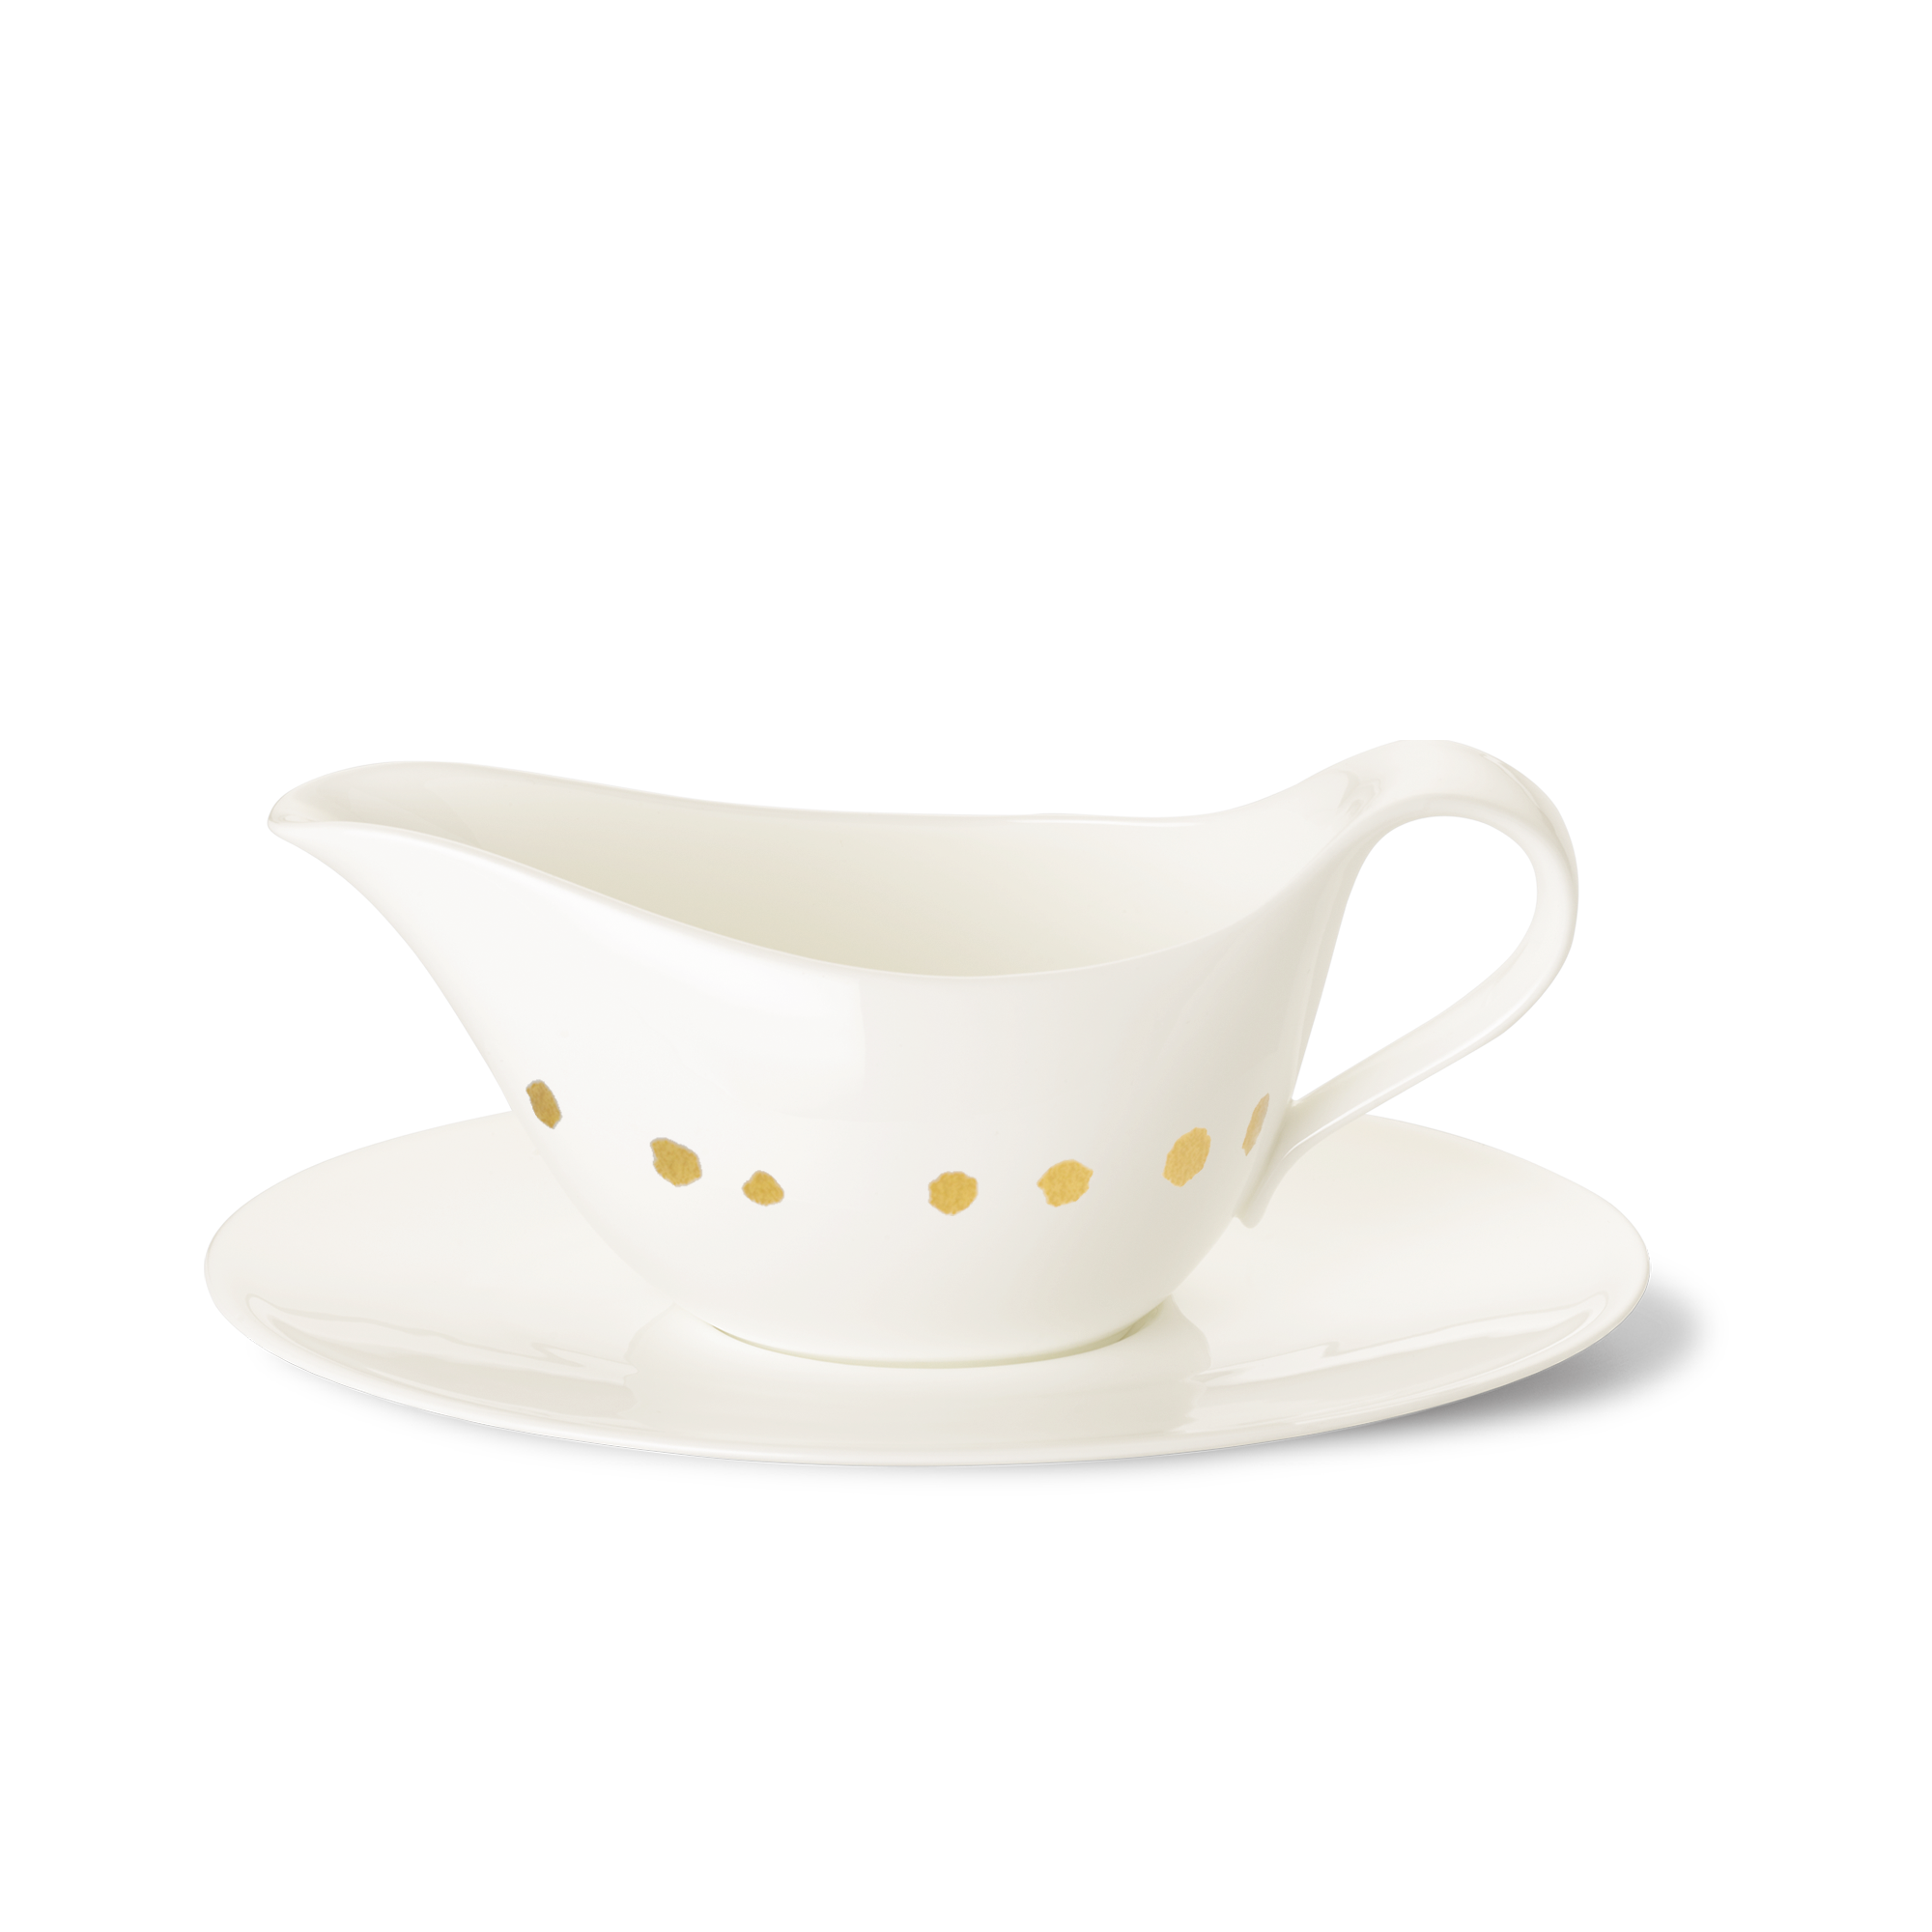 Fine Dining sauce boat 0.45 l Golden Pearls